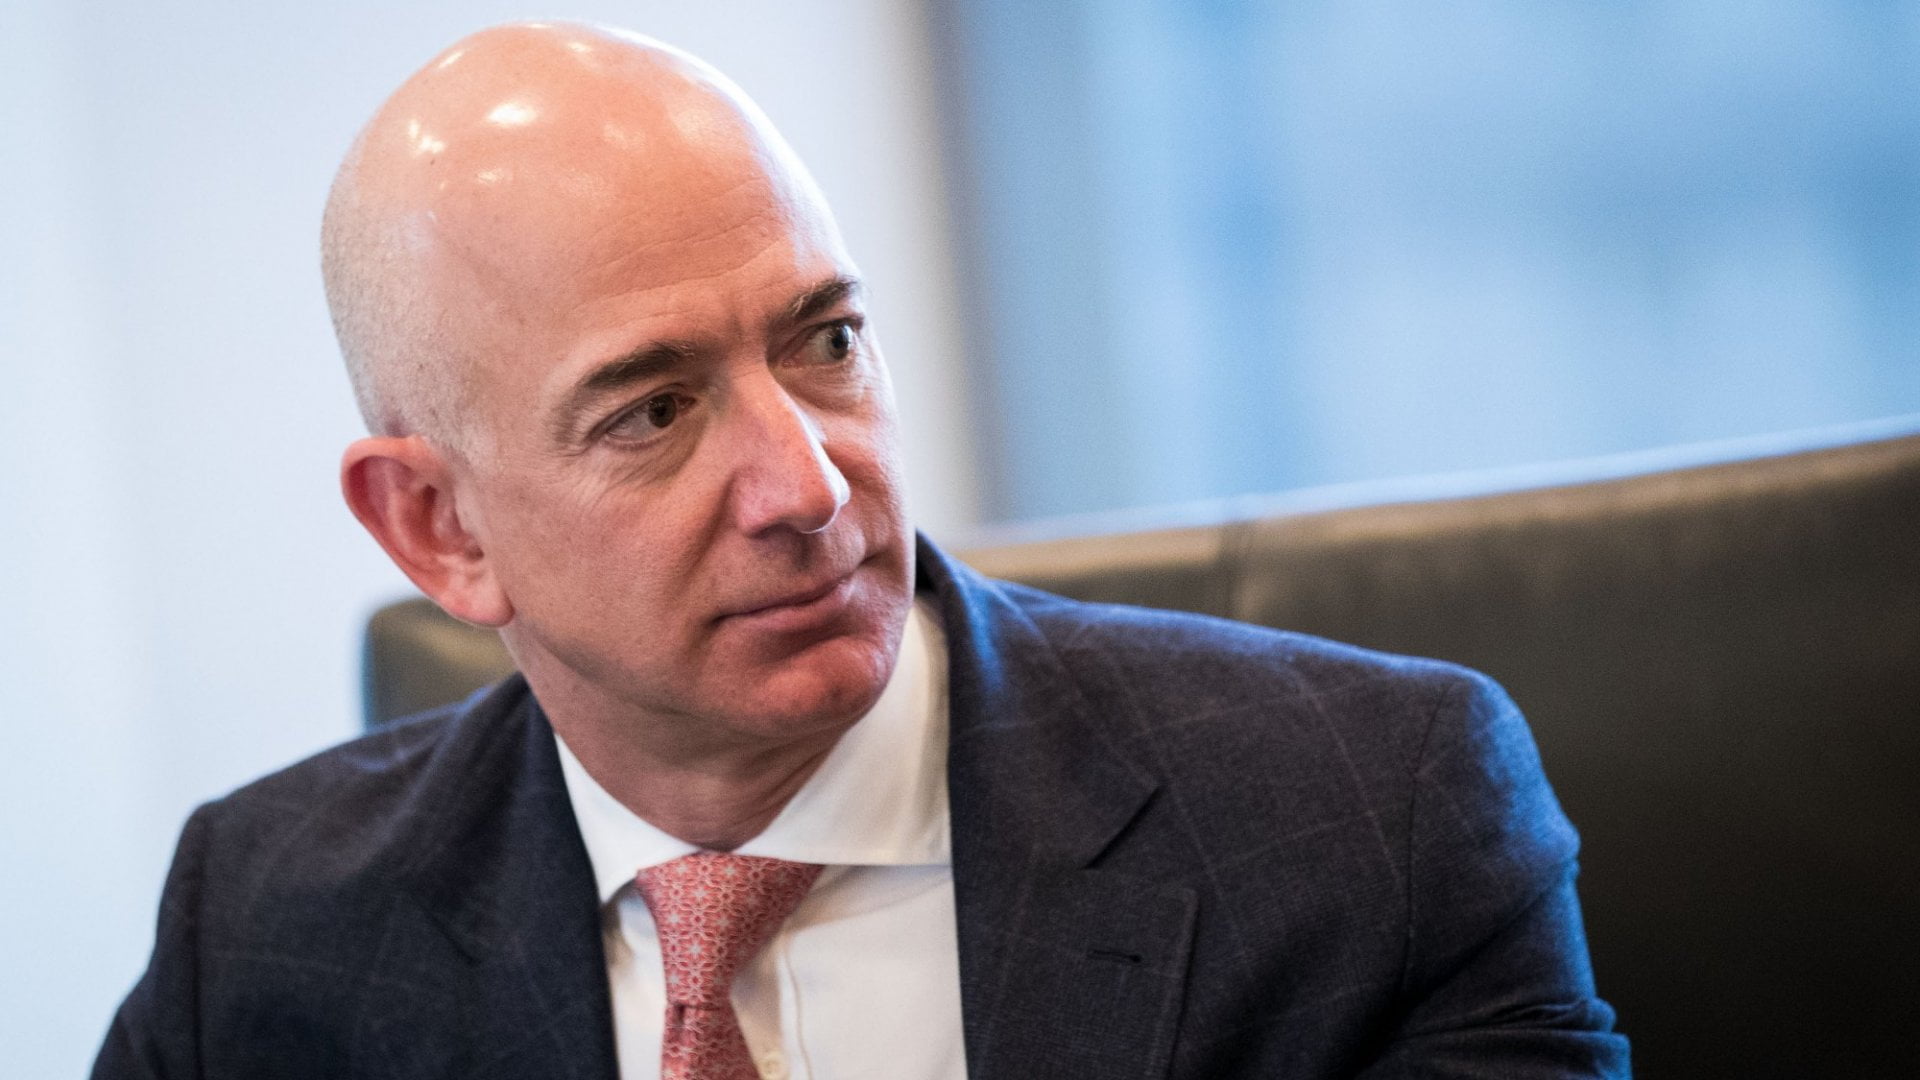 The Jeff Bezos 2-question Interview: Can It Really Work?